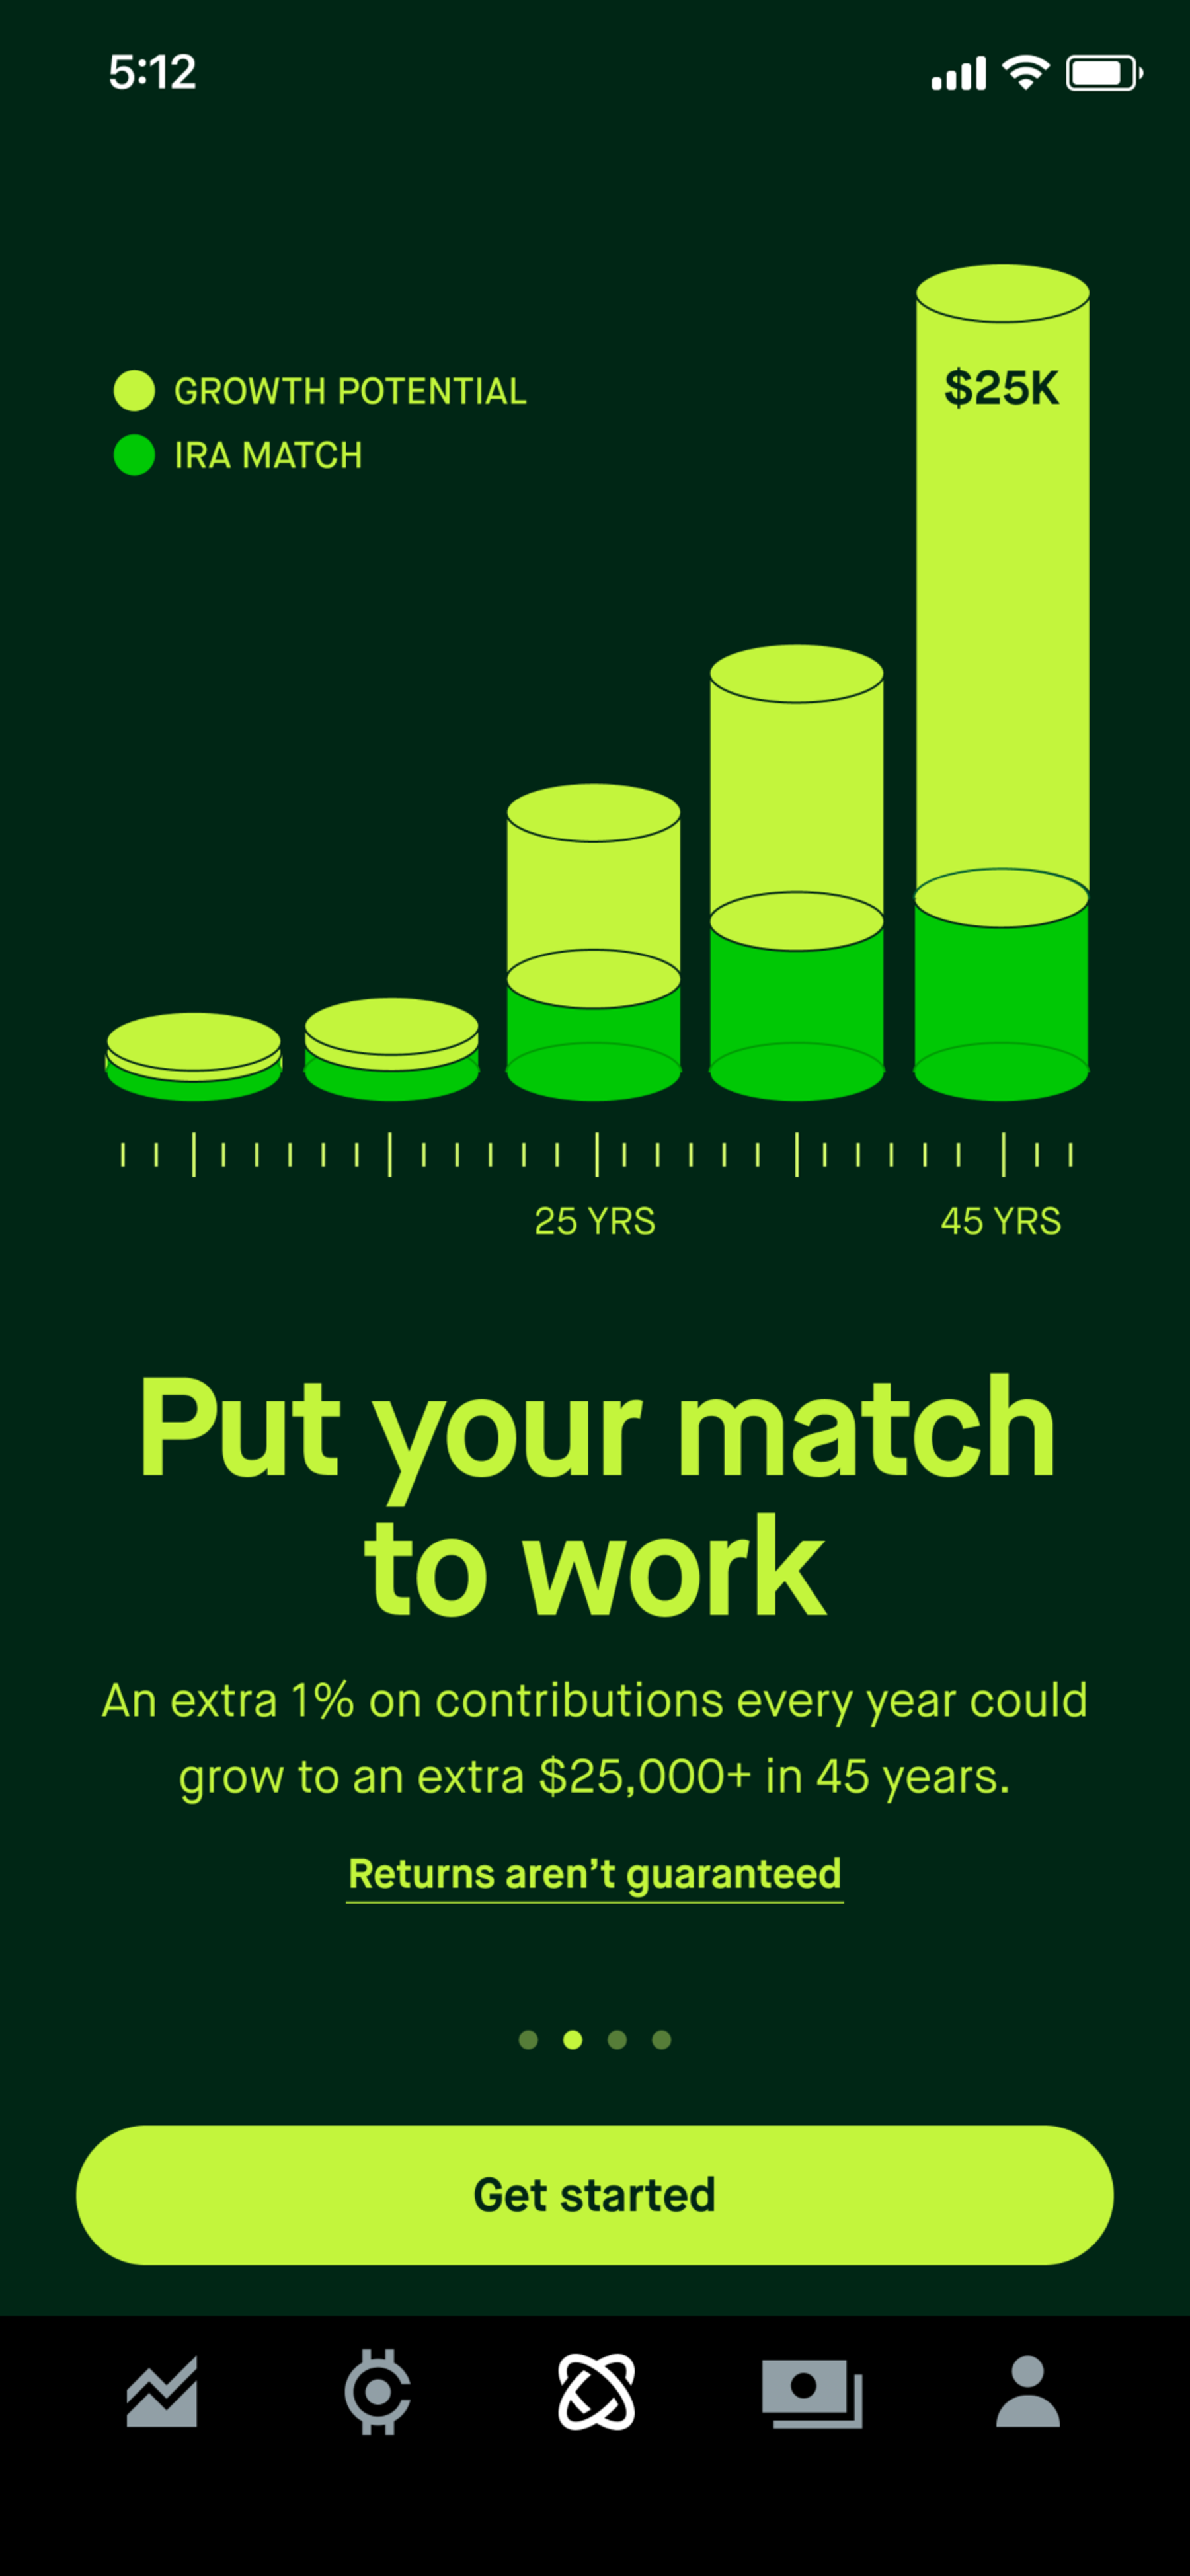 IRA Match Growth potential image